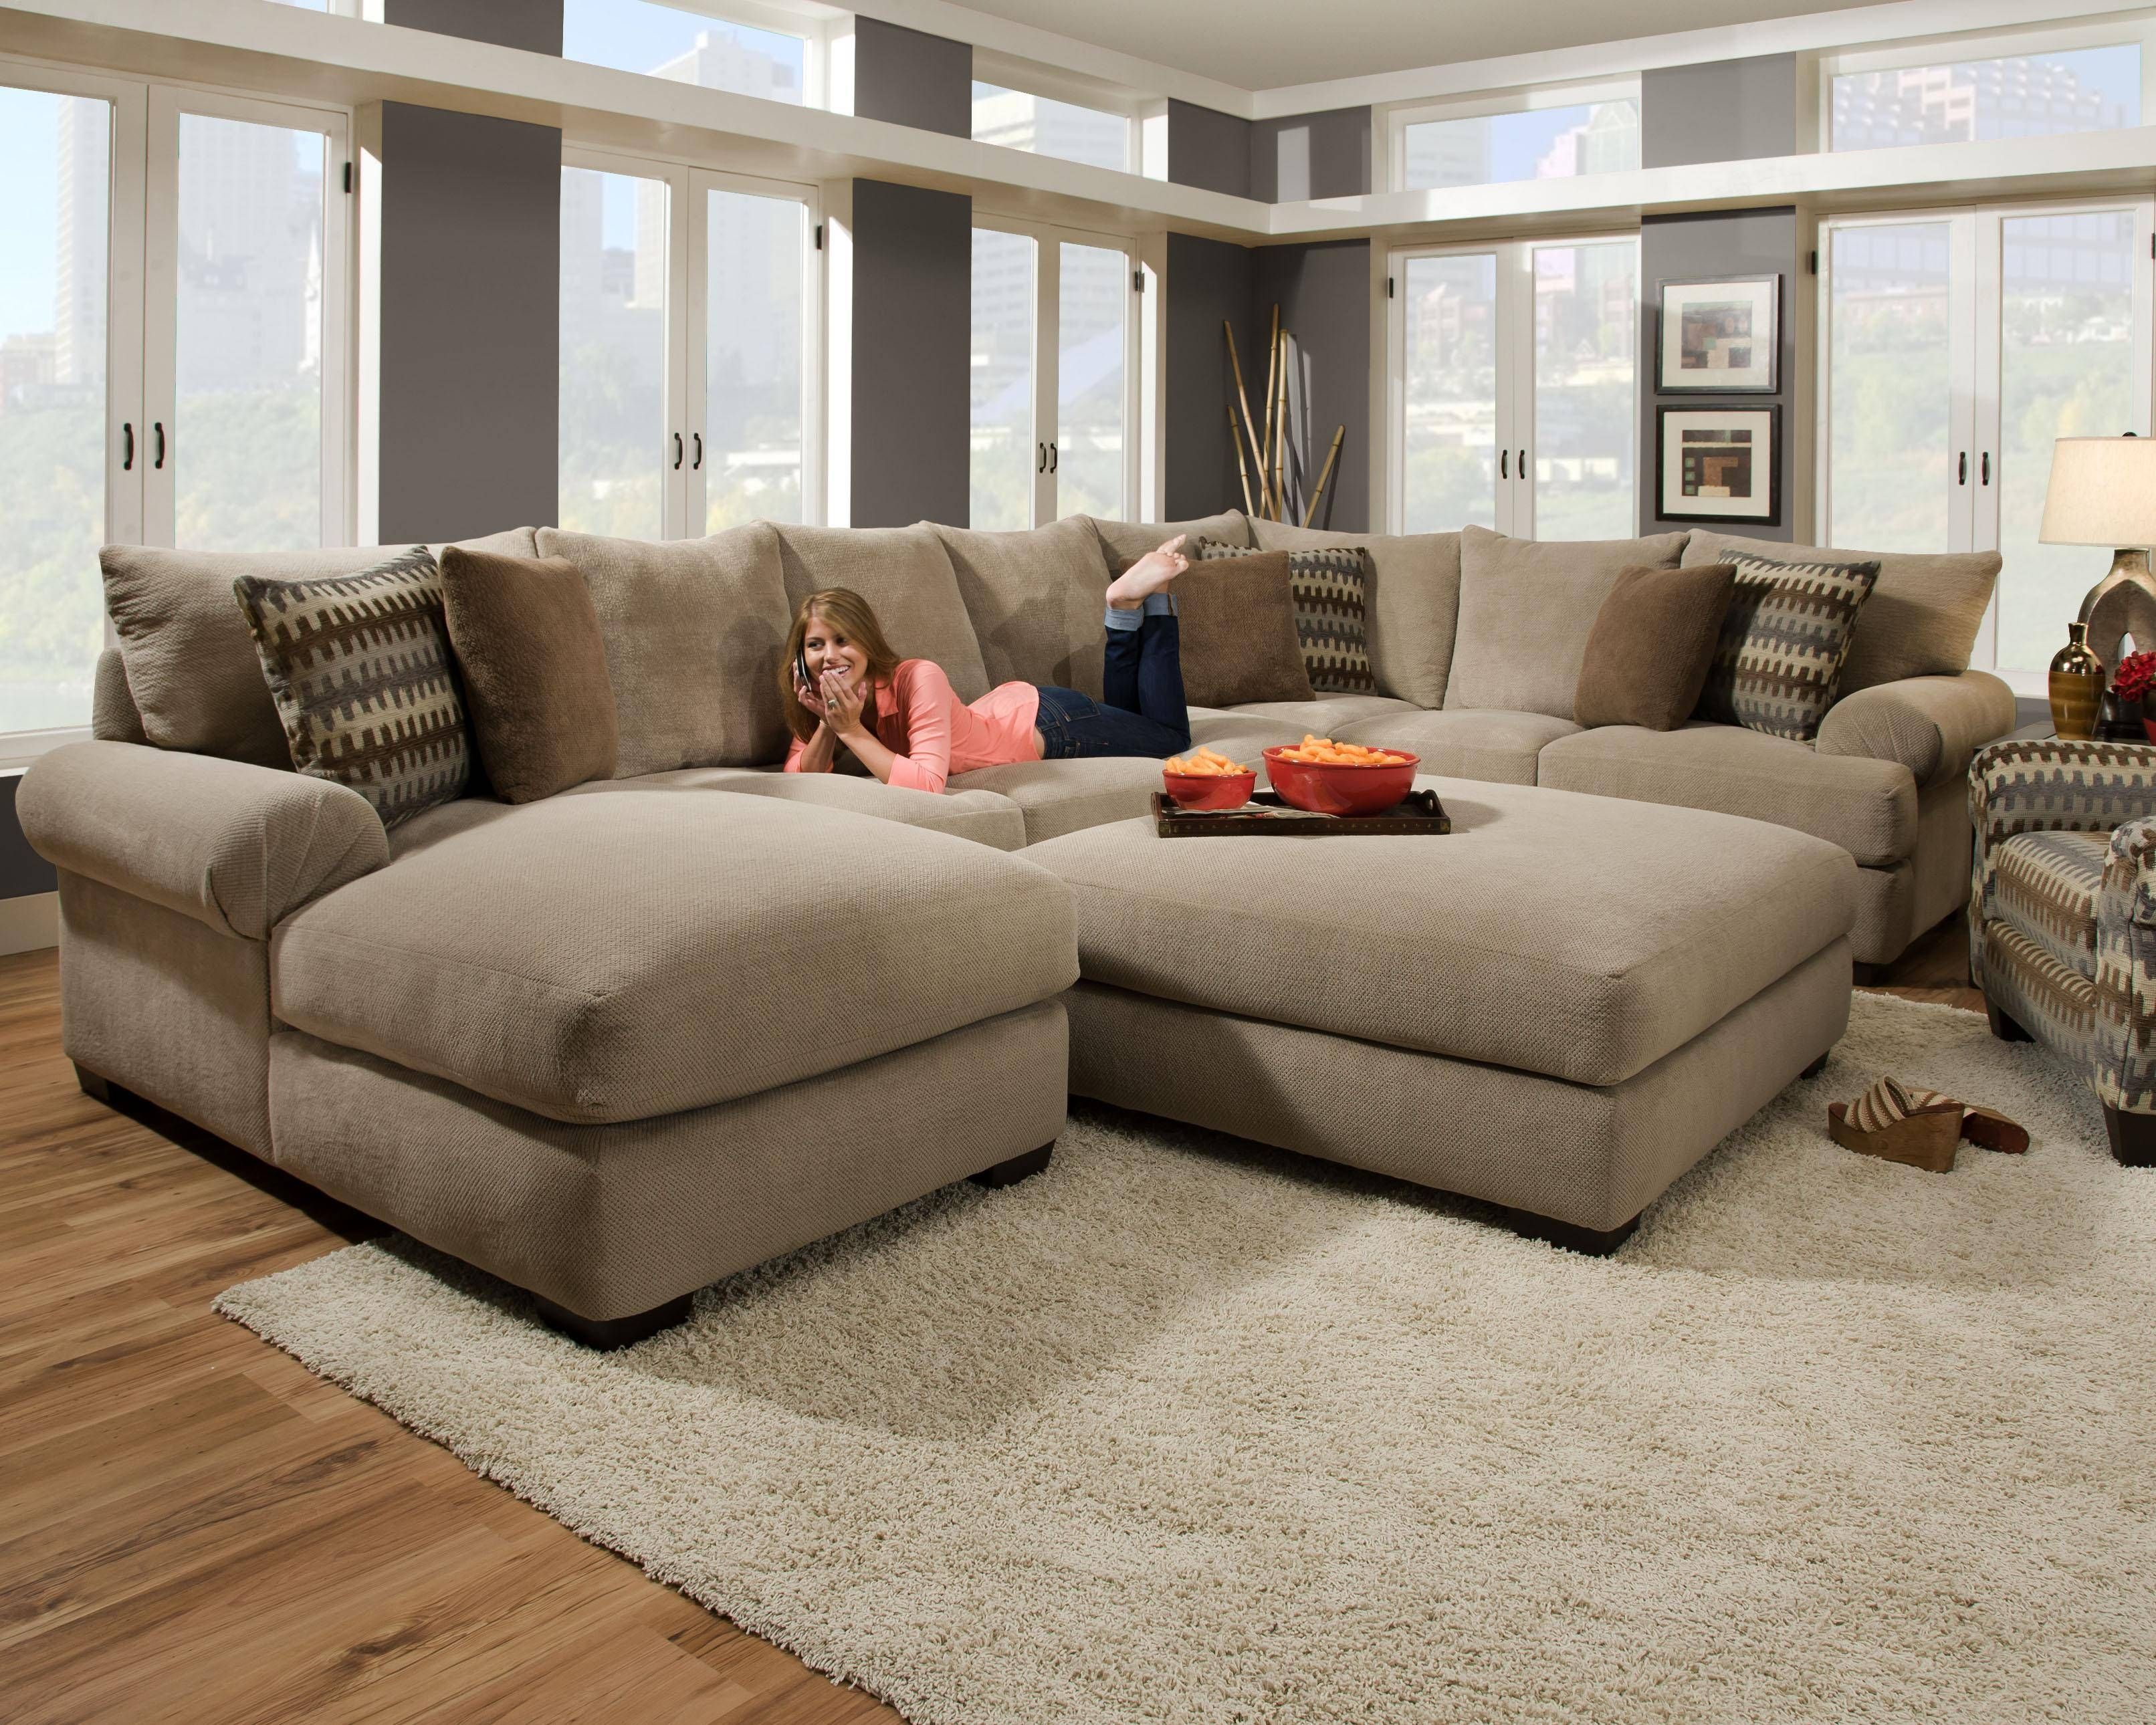 Furniture: Interesting Living Room Interior Using Large Sectional Within Big Comfy Sofas (View 11 of 15)